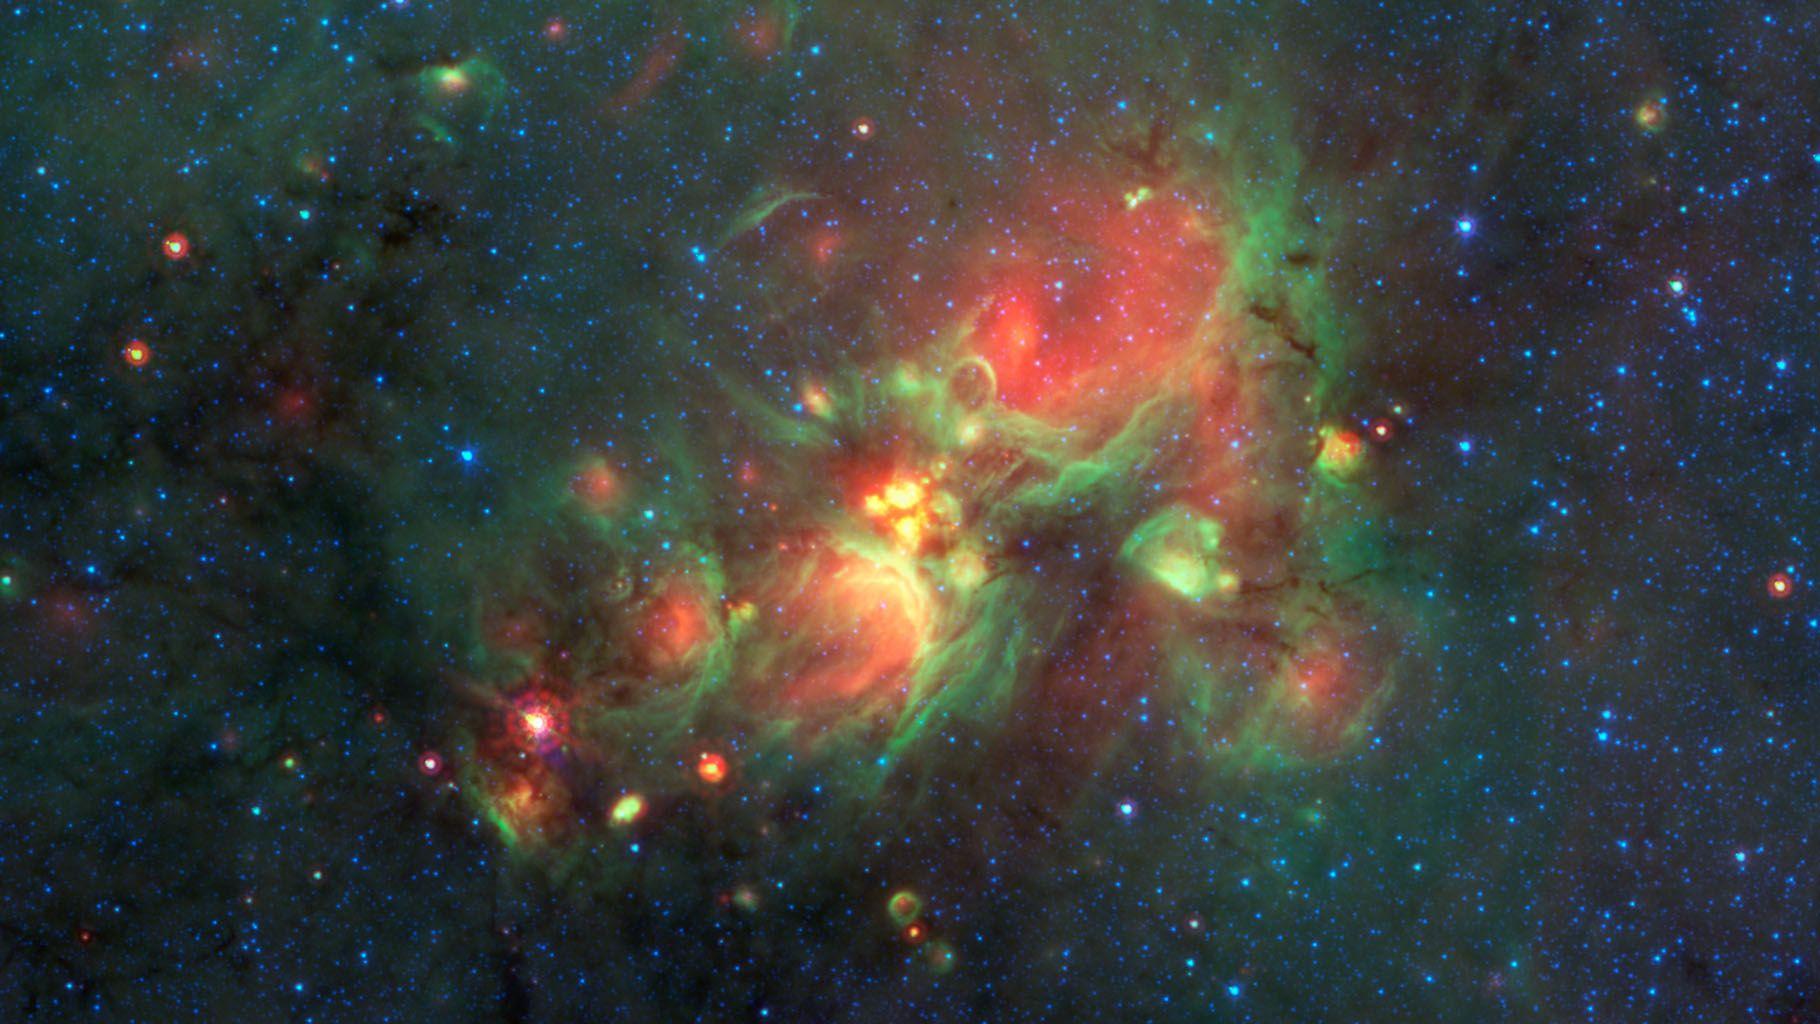 Space Image. Finding 'Yellowballs' in our Milky Way